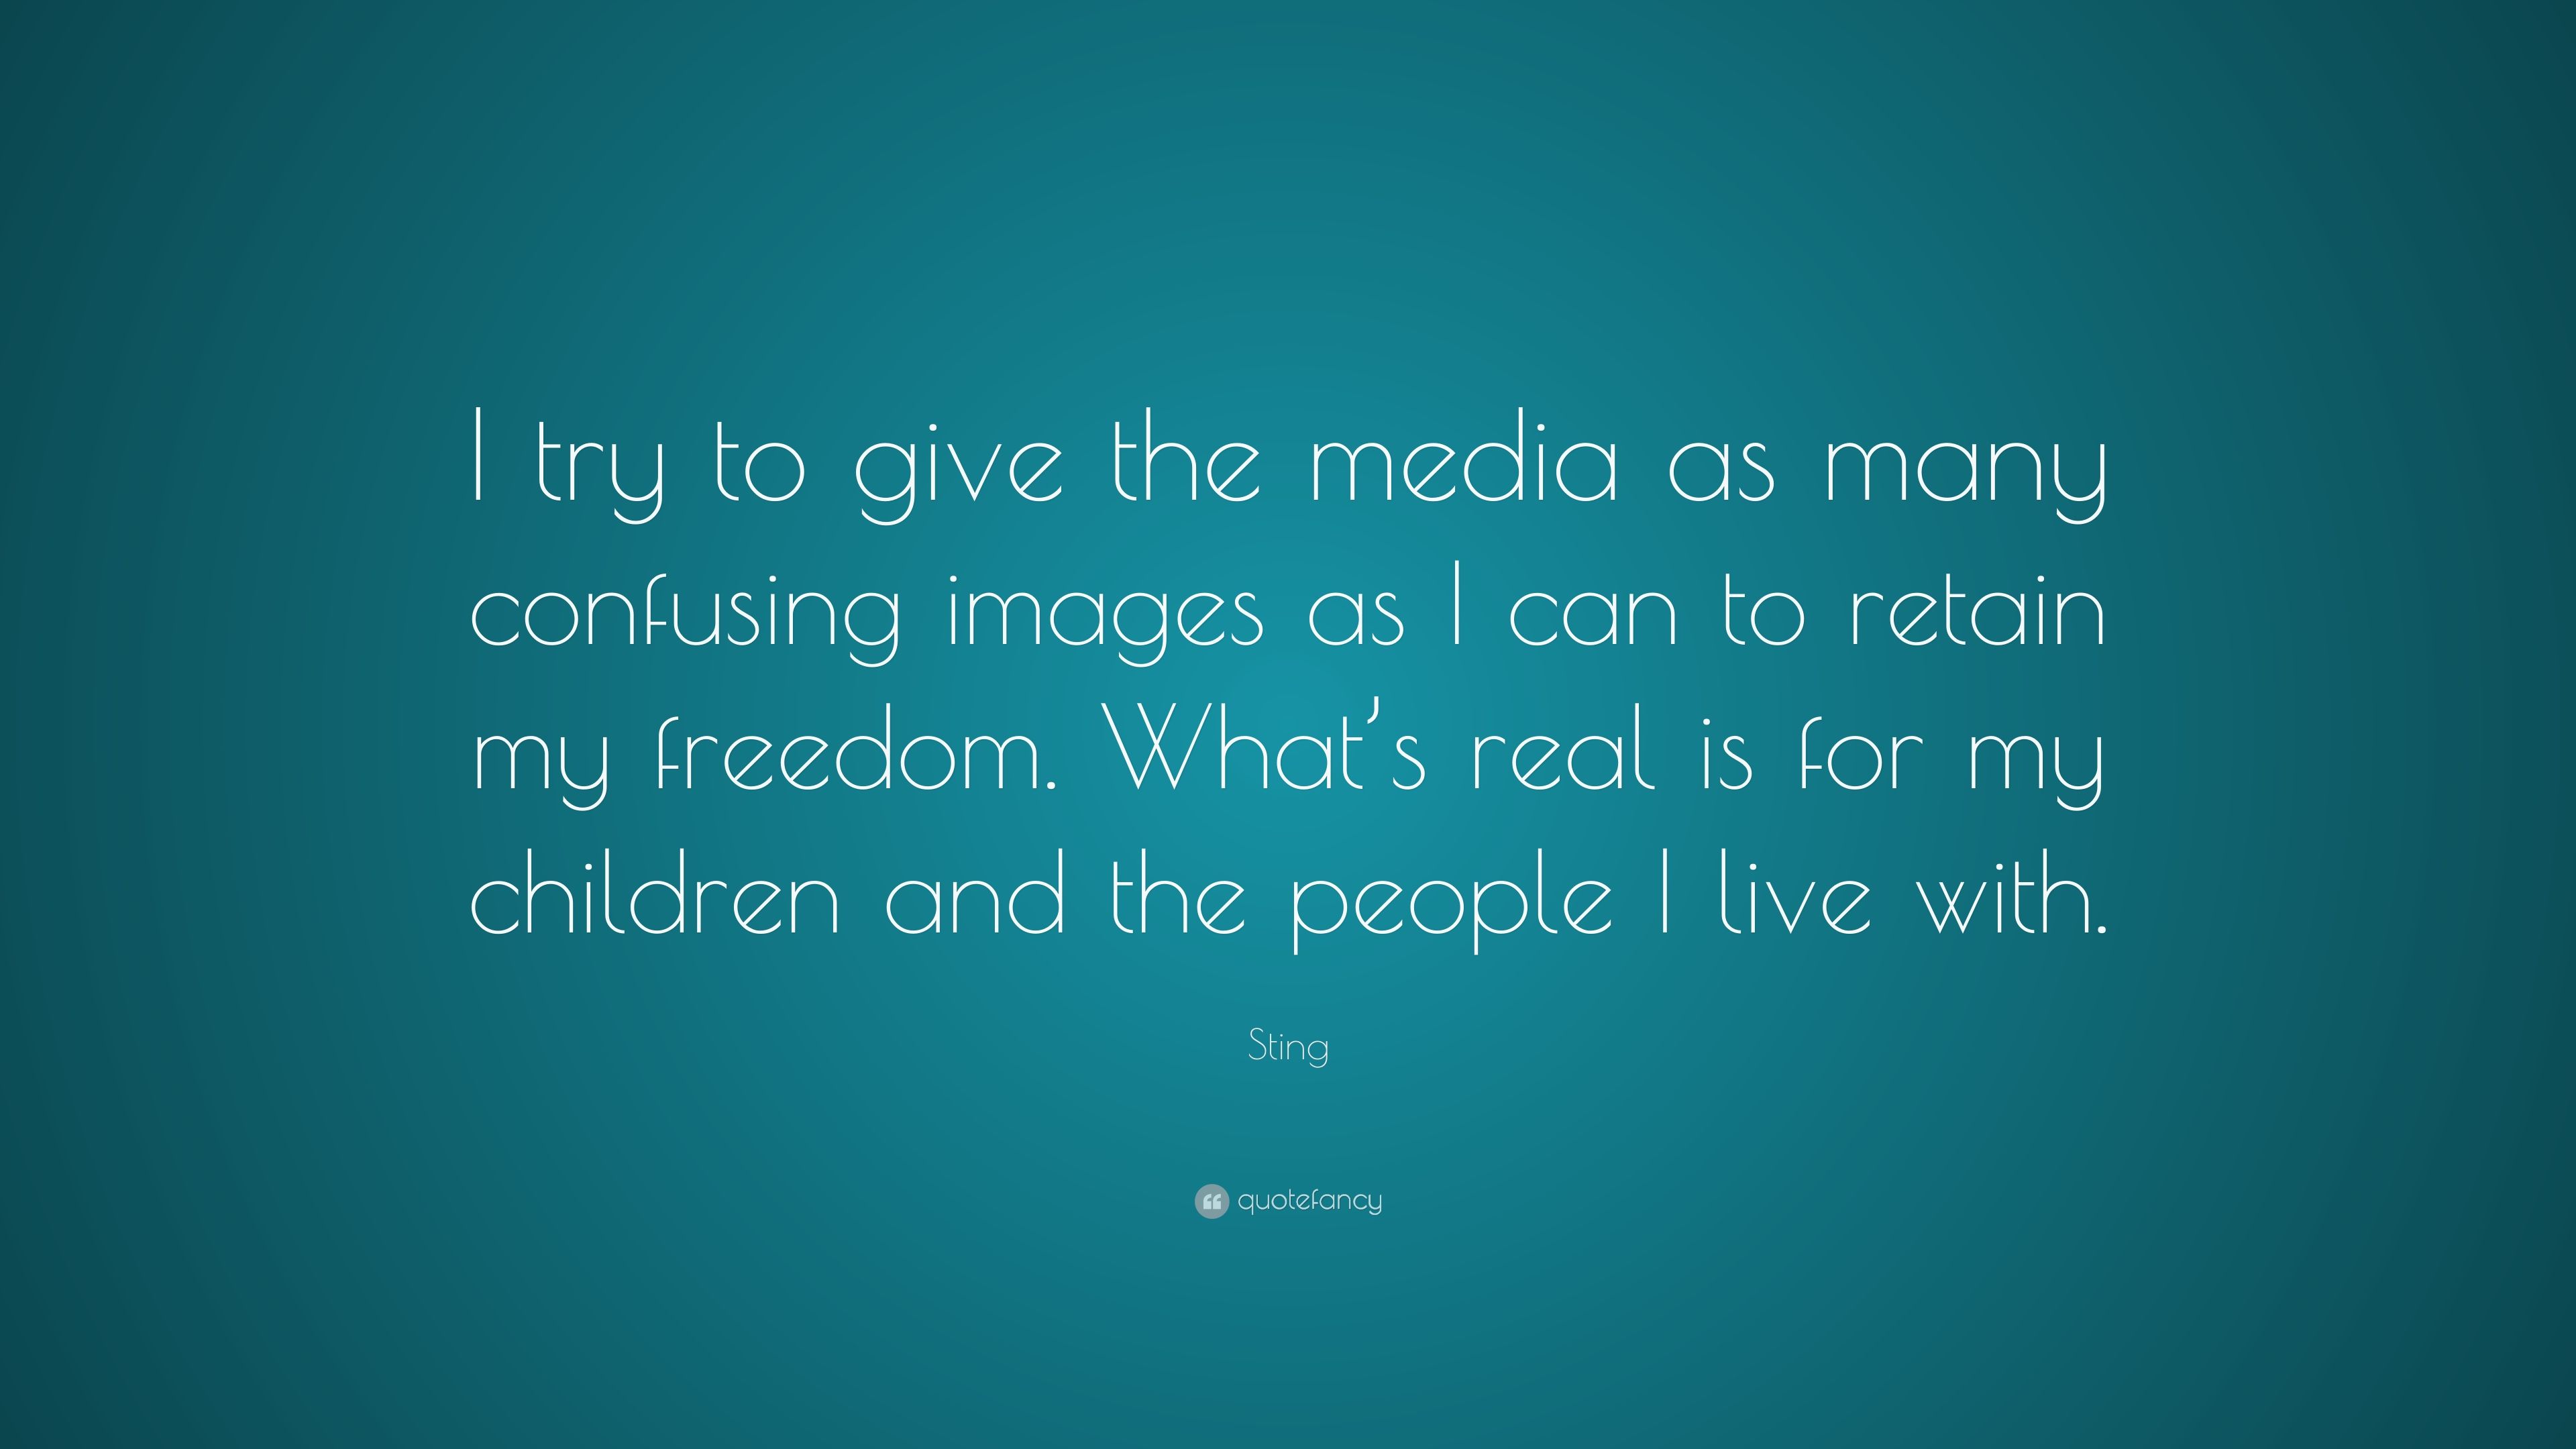 Sting Quote: “I try to give the media as many confusing image as I can to retain my freedom. What's real is for my children and the p.” (7 wallpaper)